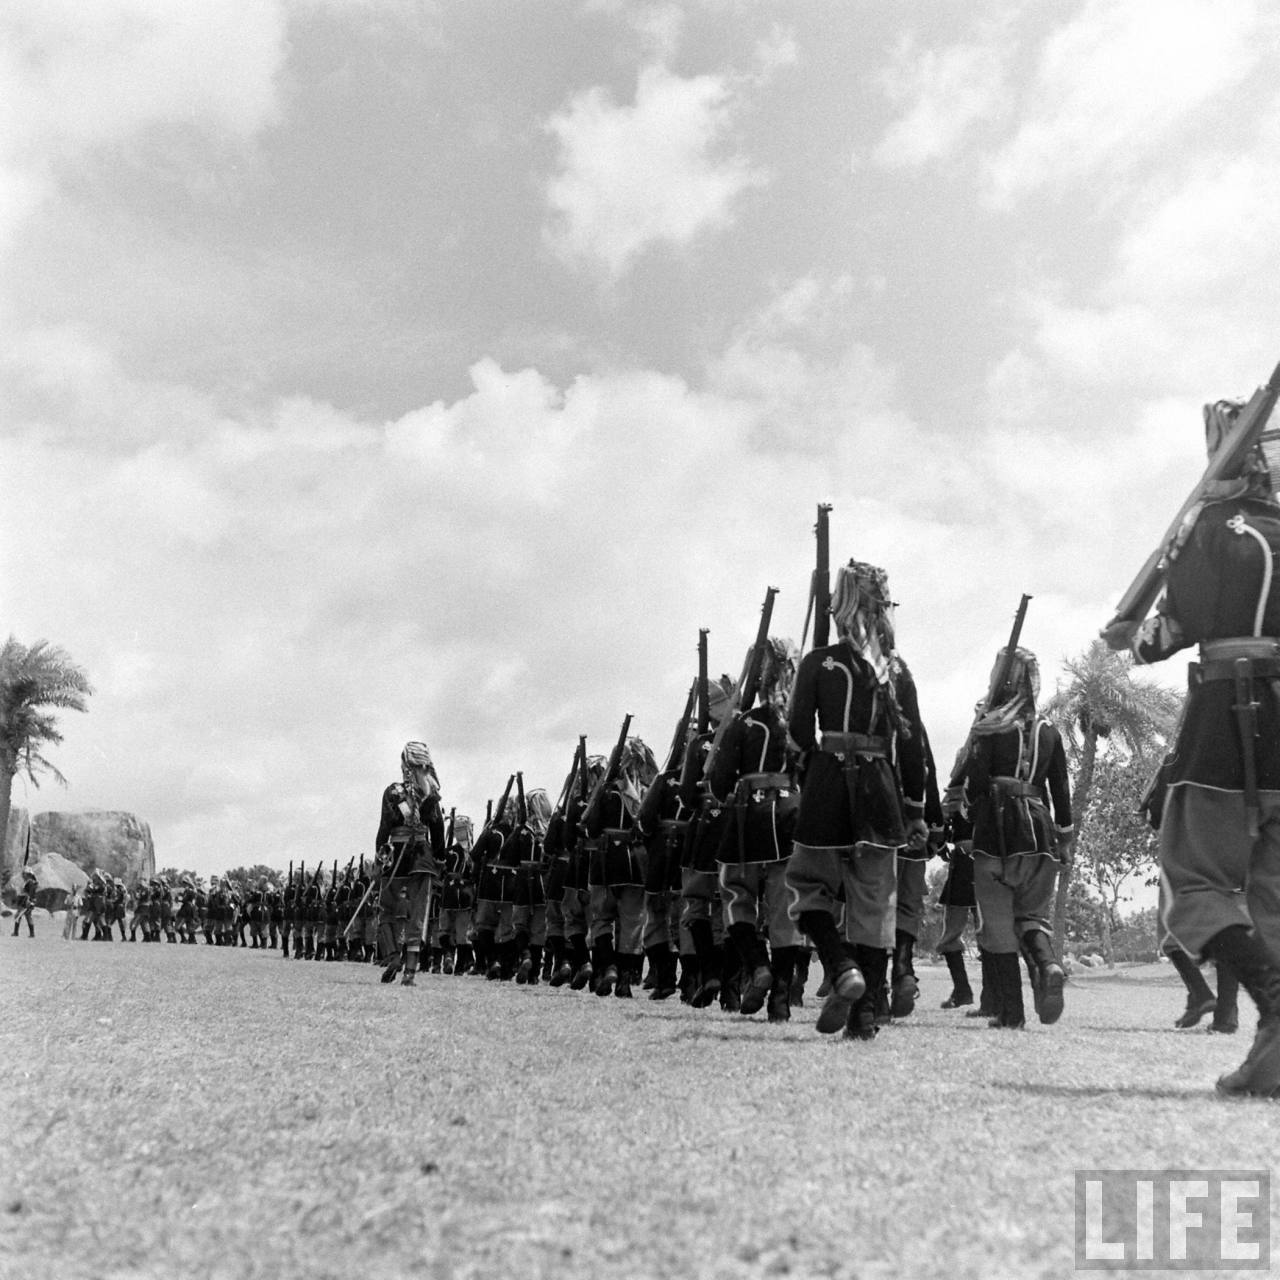 Hyderabad State Forces | Operation Polo | Hyderabad Police Action | Annexation of Hyderabad, Hyderabad (Deccan), Telangana, India | Rare & Old Vintage Photos of Operation Polo, Hyderabad (Deccan), Telangana, India (1948)